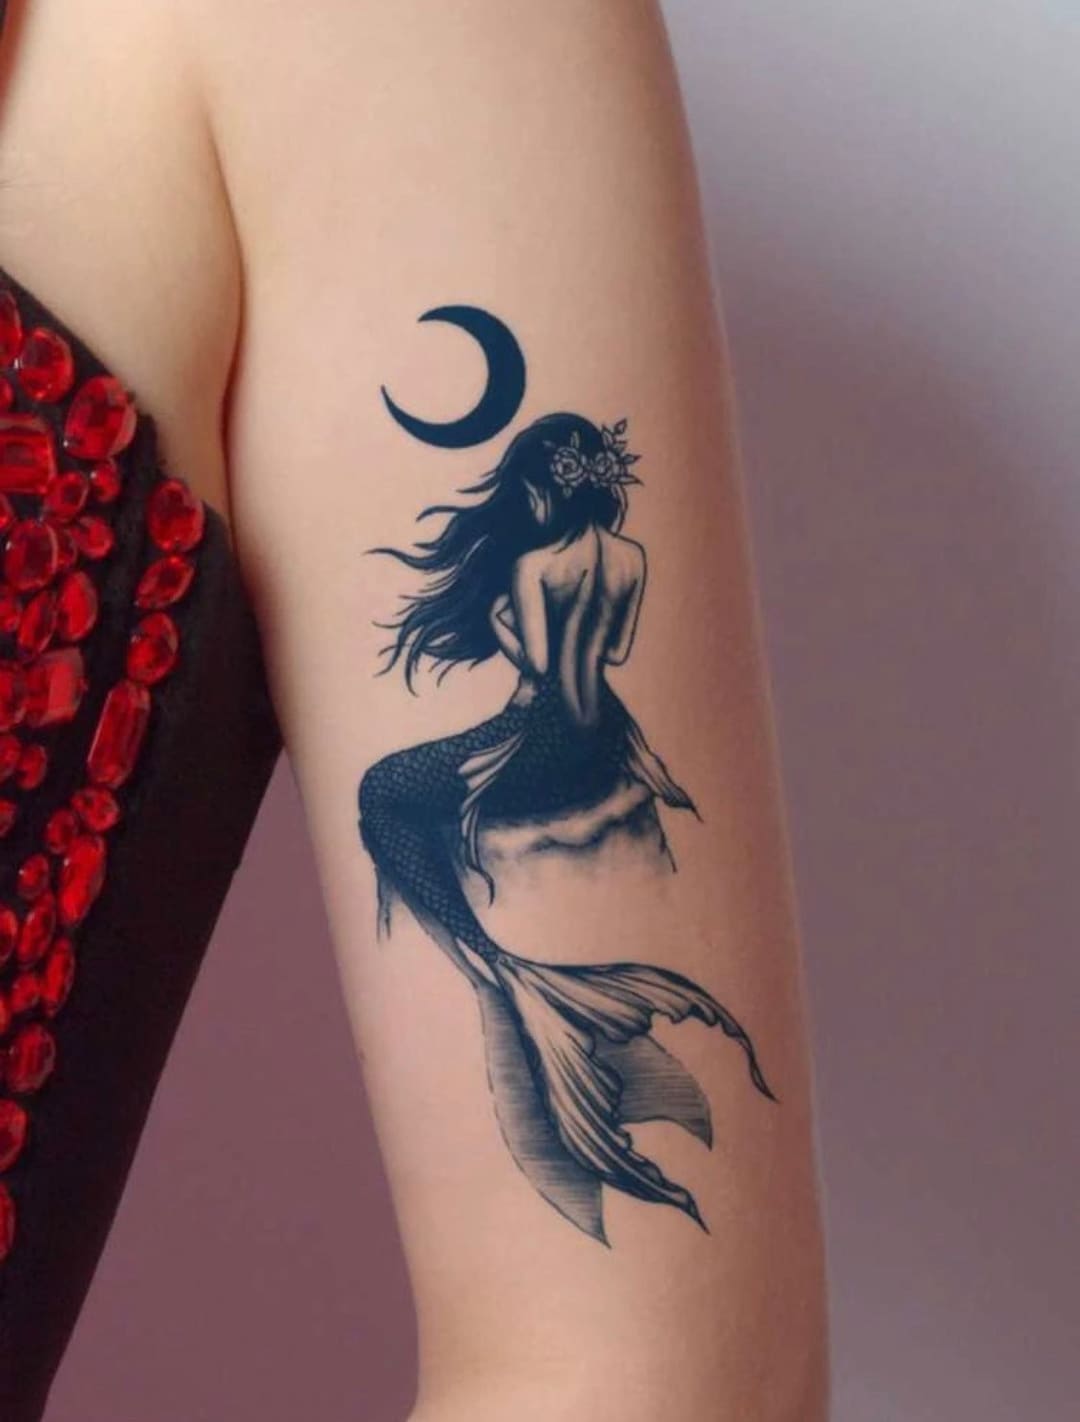 Tattoos For Everyone Who Secretly Knows They're a Mermaid | CafeMom.com